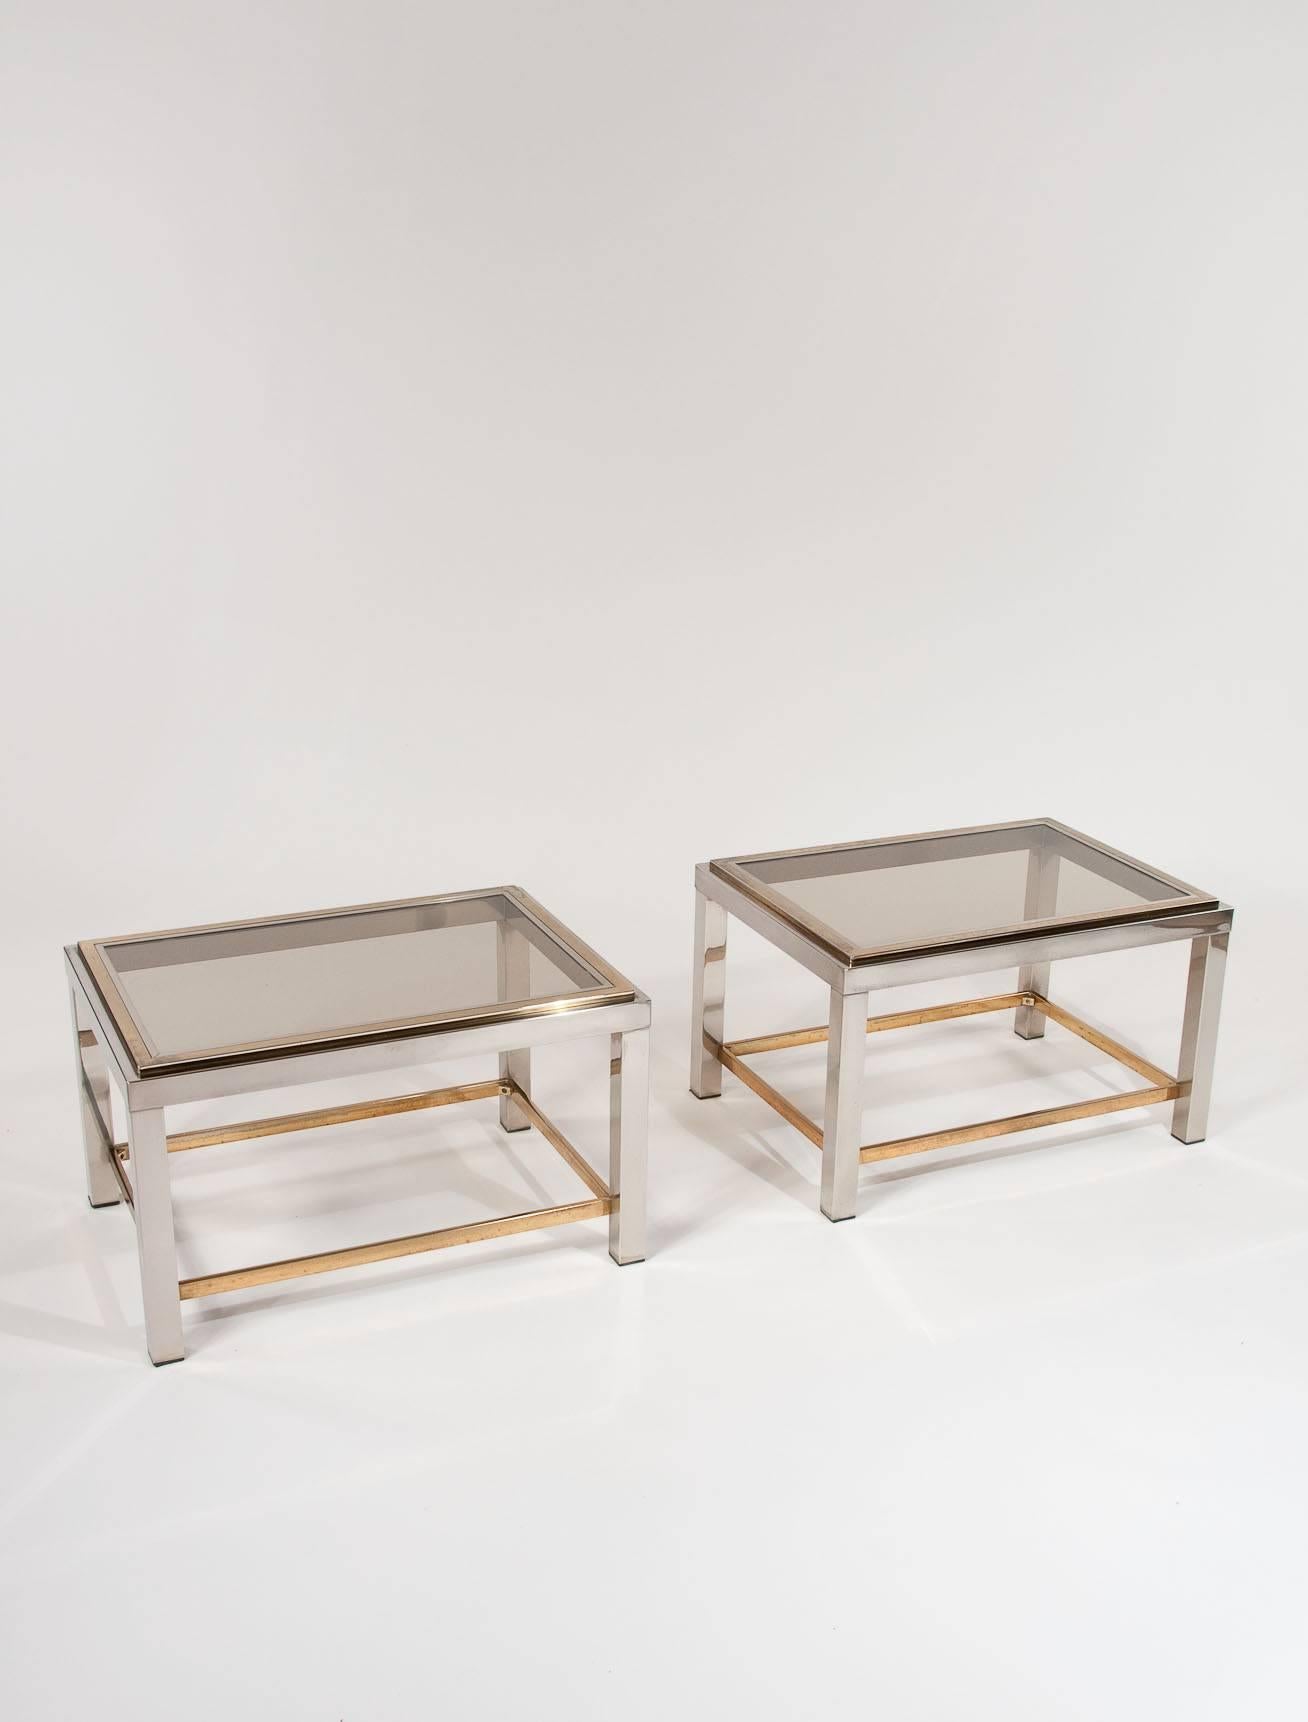 A pair of 1960s chrome and brass Willy Rizzo designed tables. This pair of Flaminia end/cocktail tables are one of the celebrated Italian designer Willy Rizzo's most iconic pieces of furniture, designed after the Rolex watch being bi metal steel and